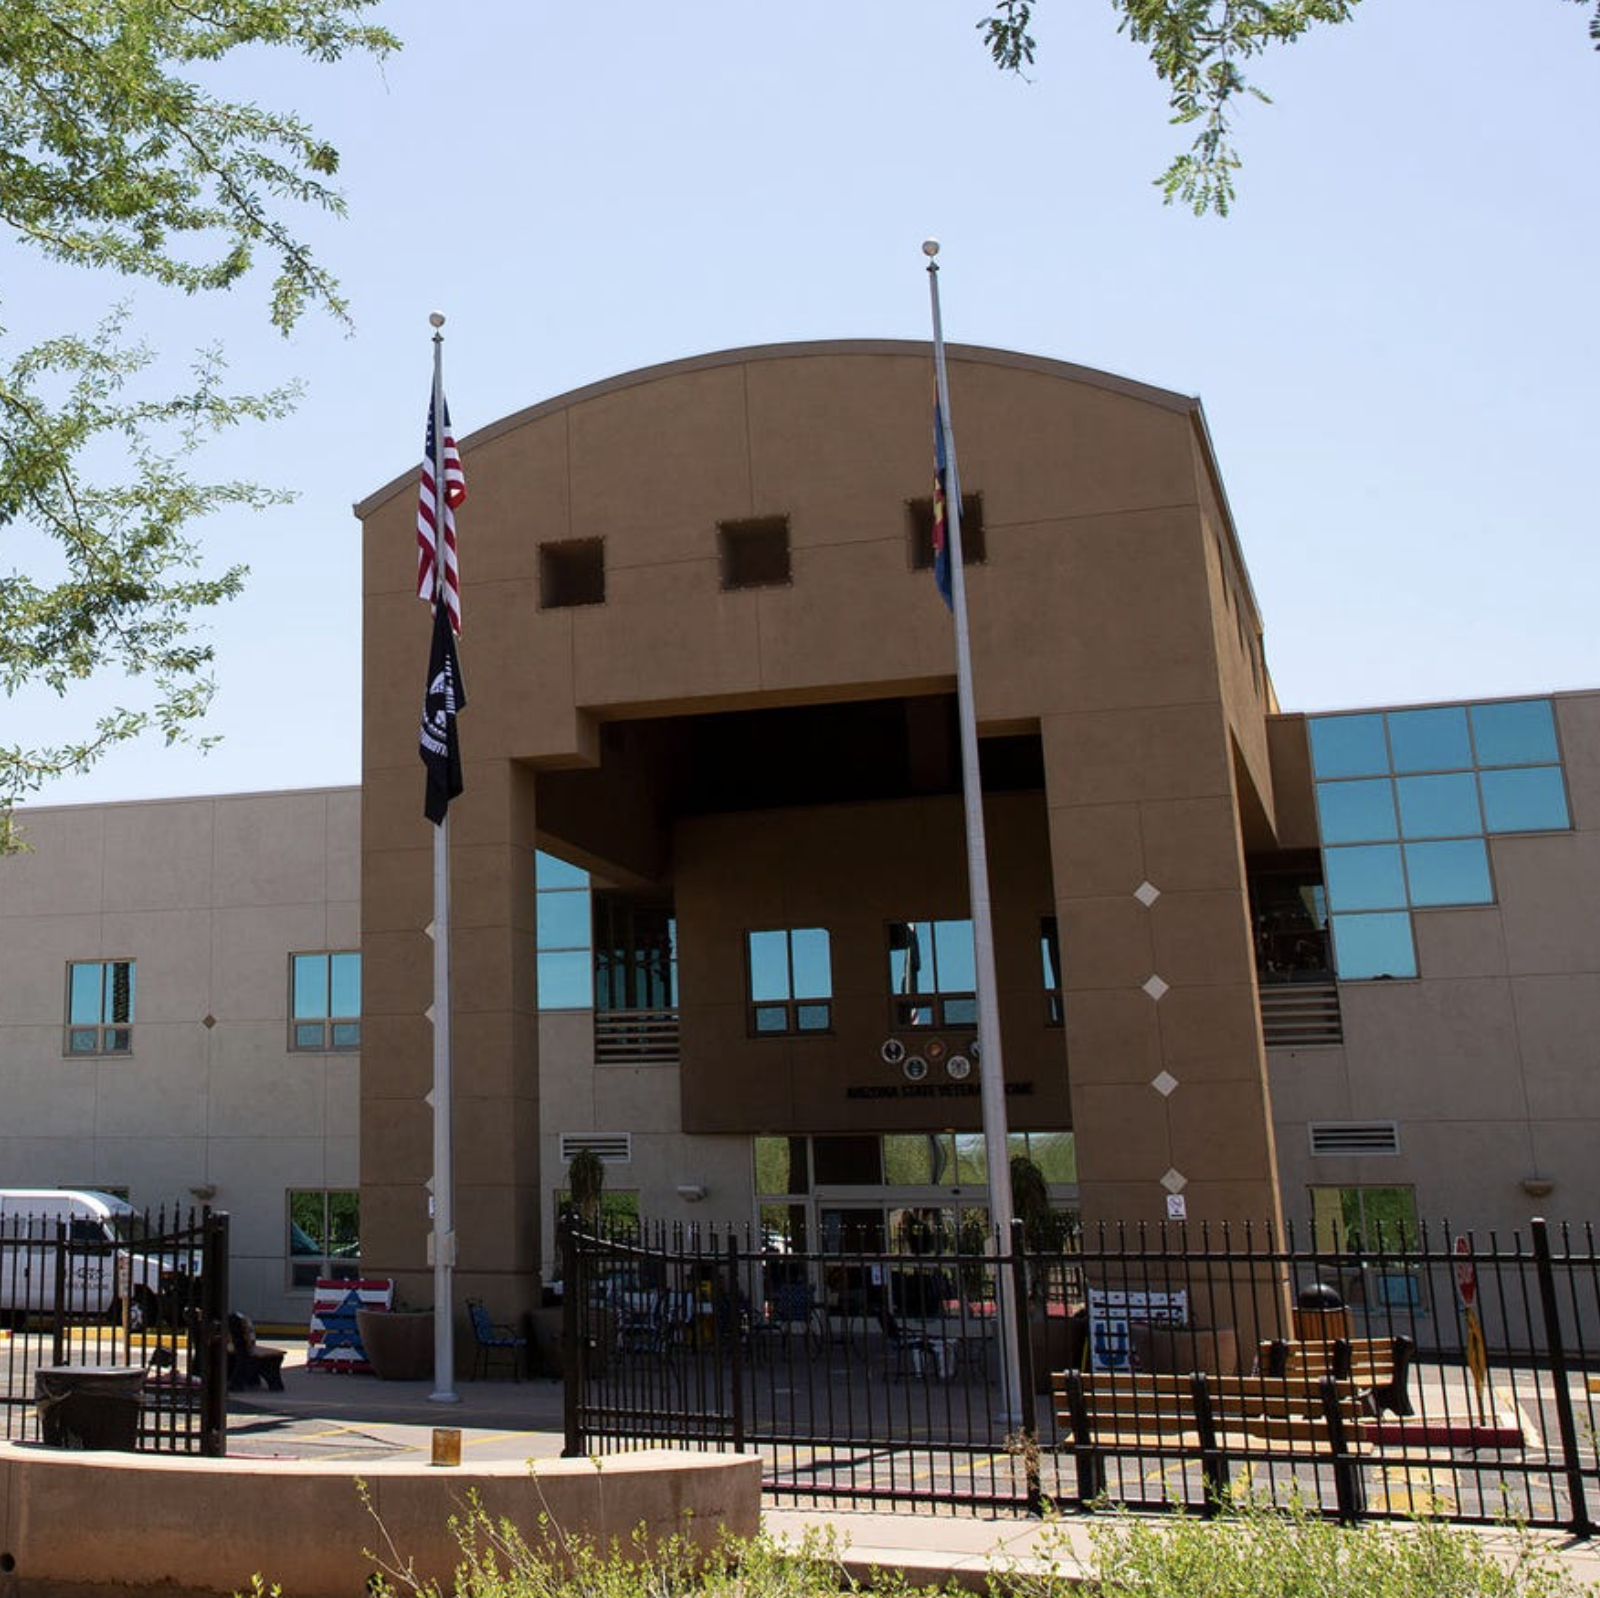 123 have unexpectedly died in nursing homes, but Arizona still gives them top grades Image